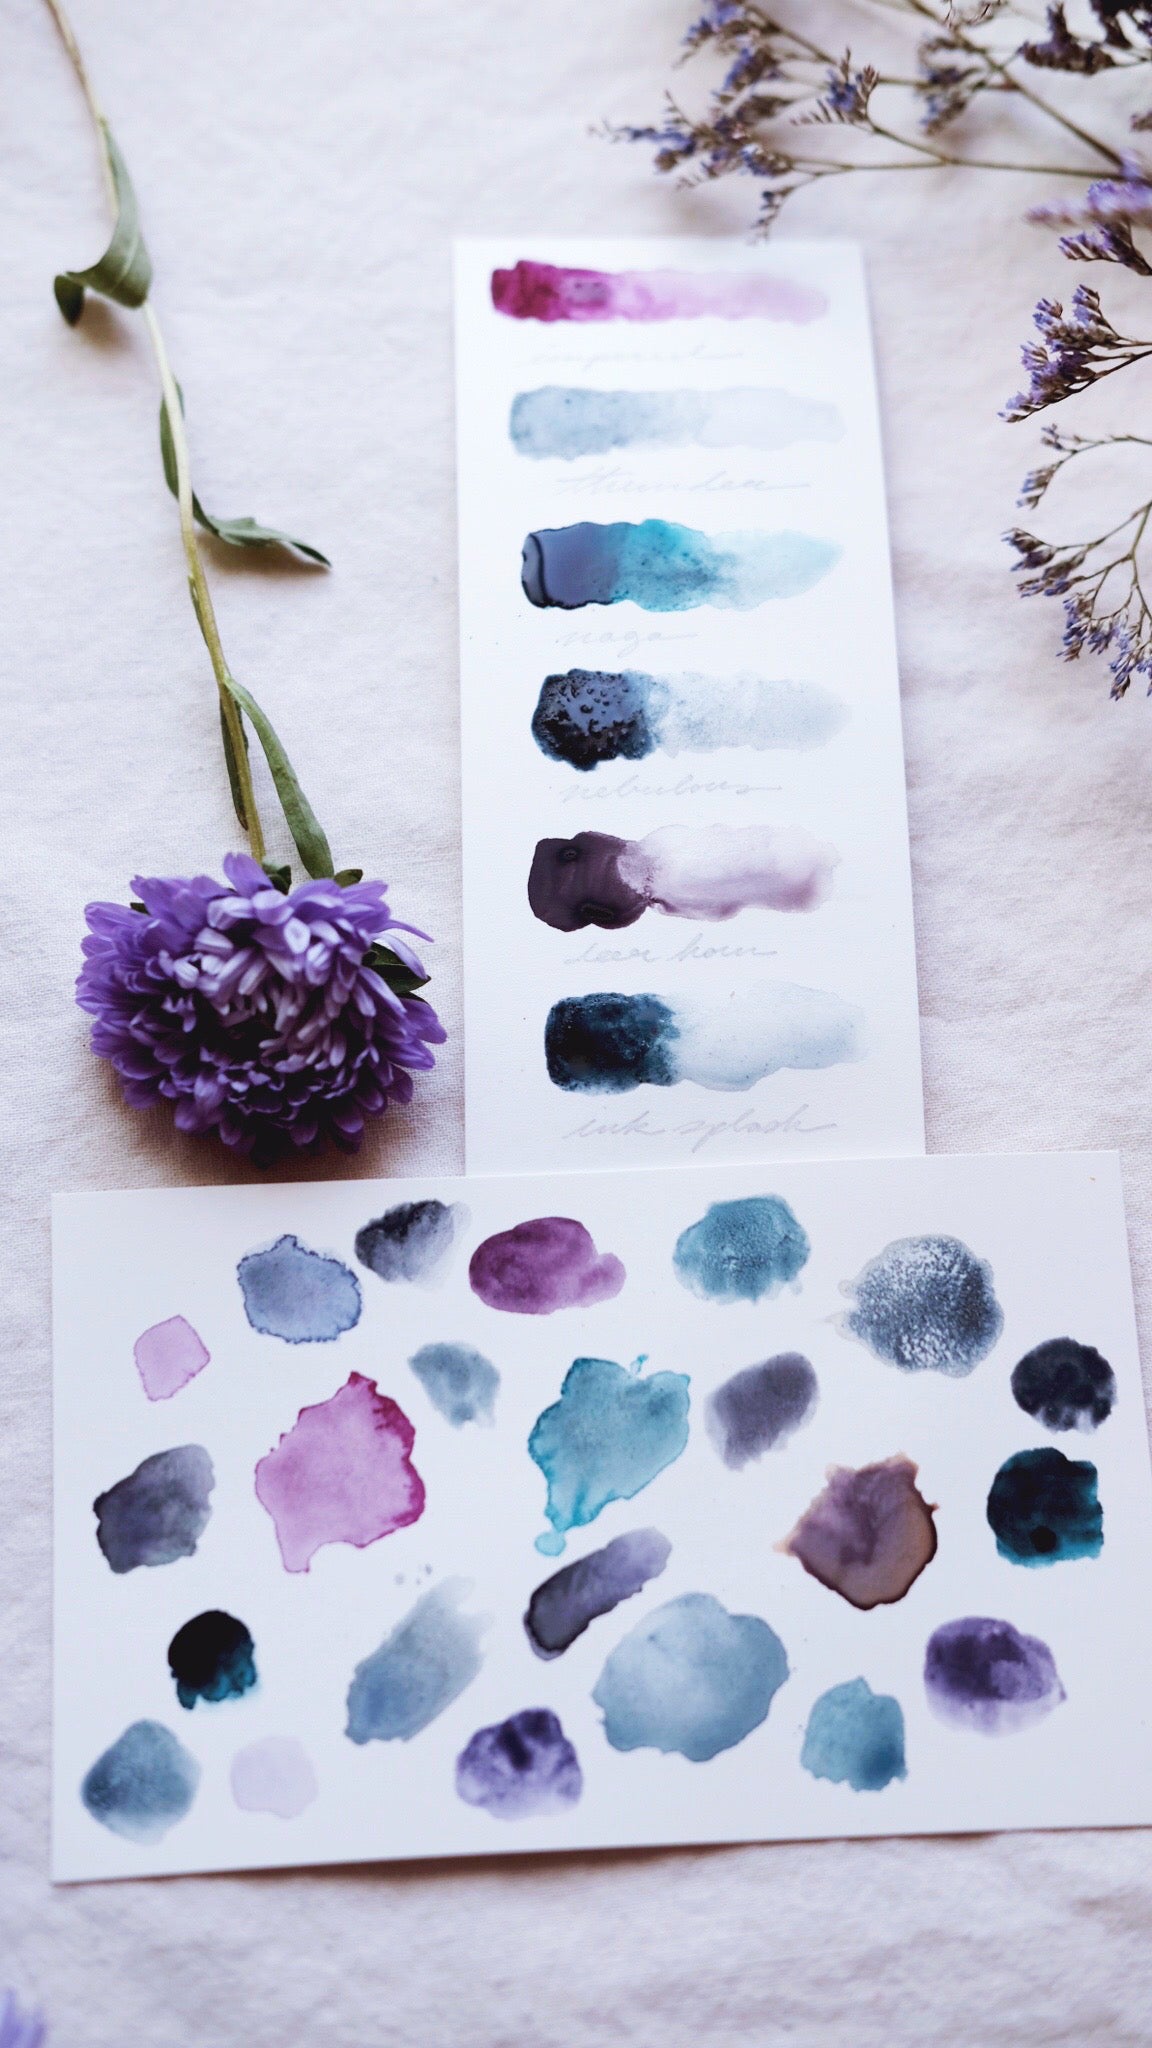 RESERVE for Rose + Cloud Dragon + Limited edition Mineral watercolor palette